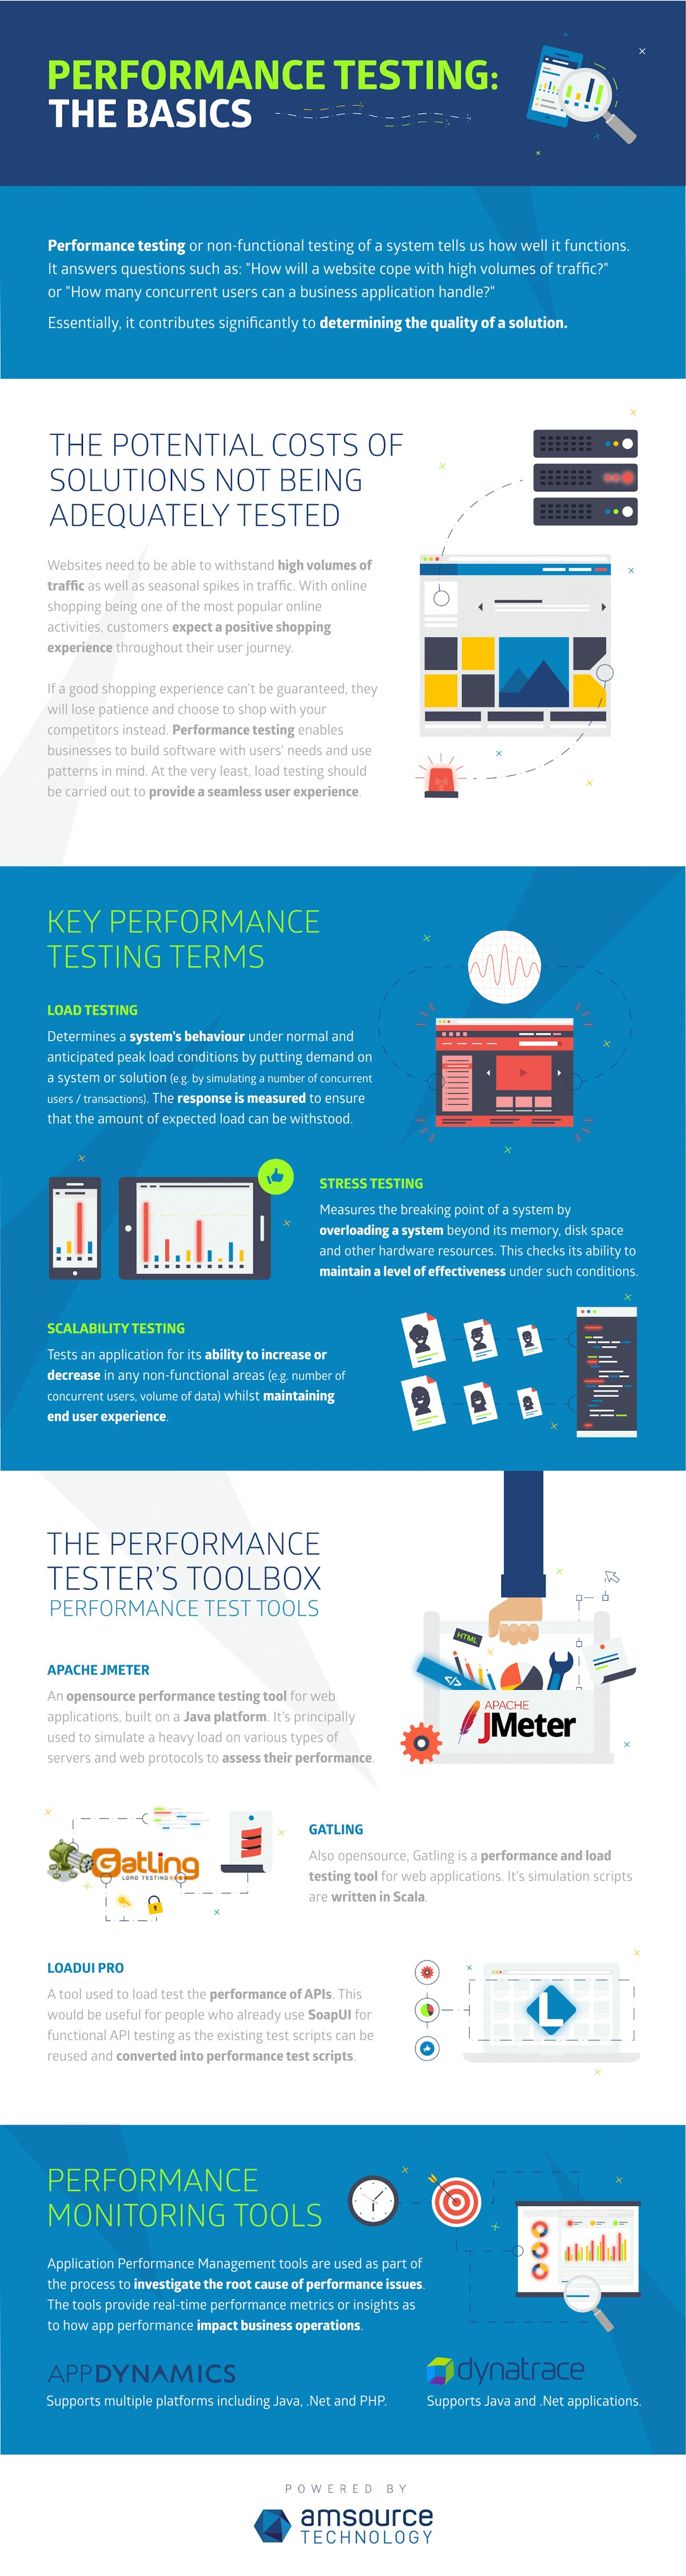 featured image - [Infographic] Performance Testing: The Basics